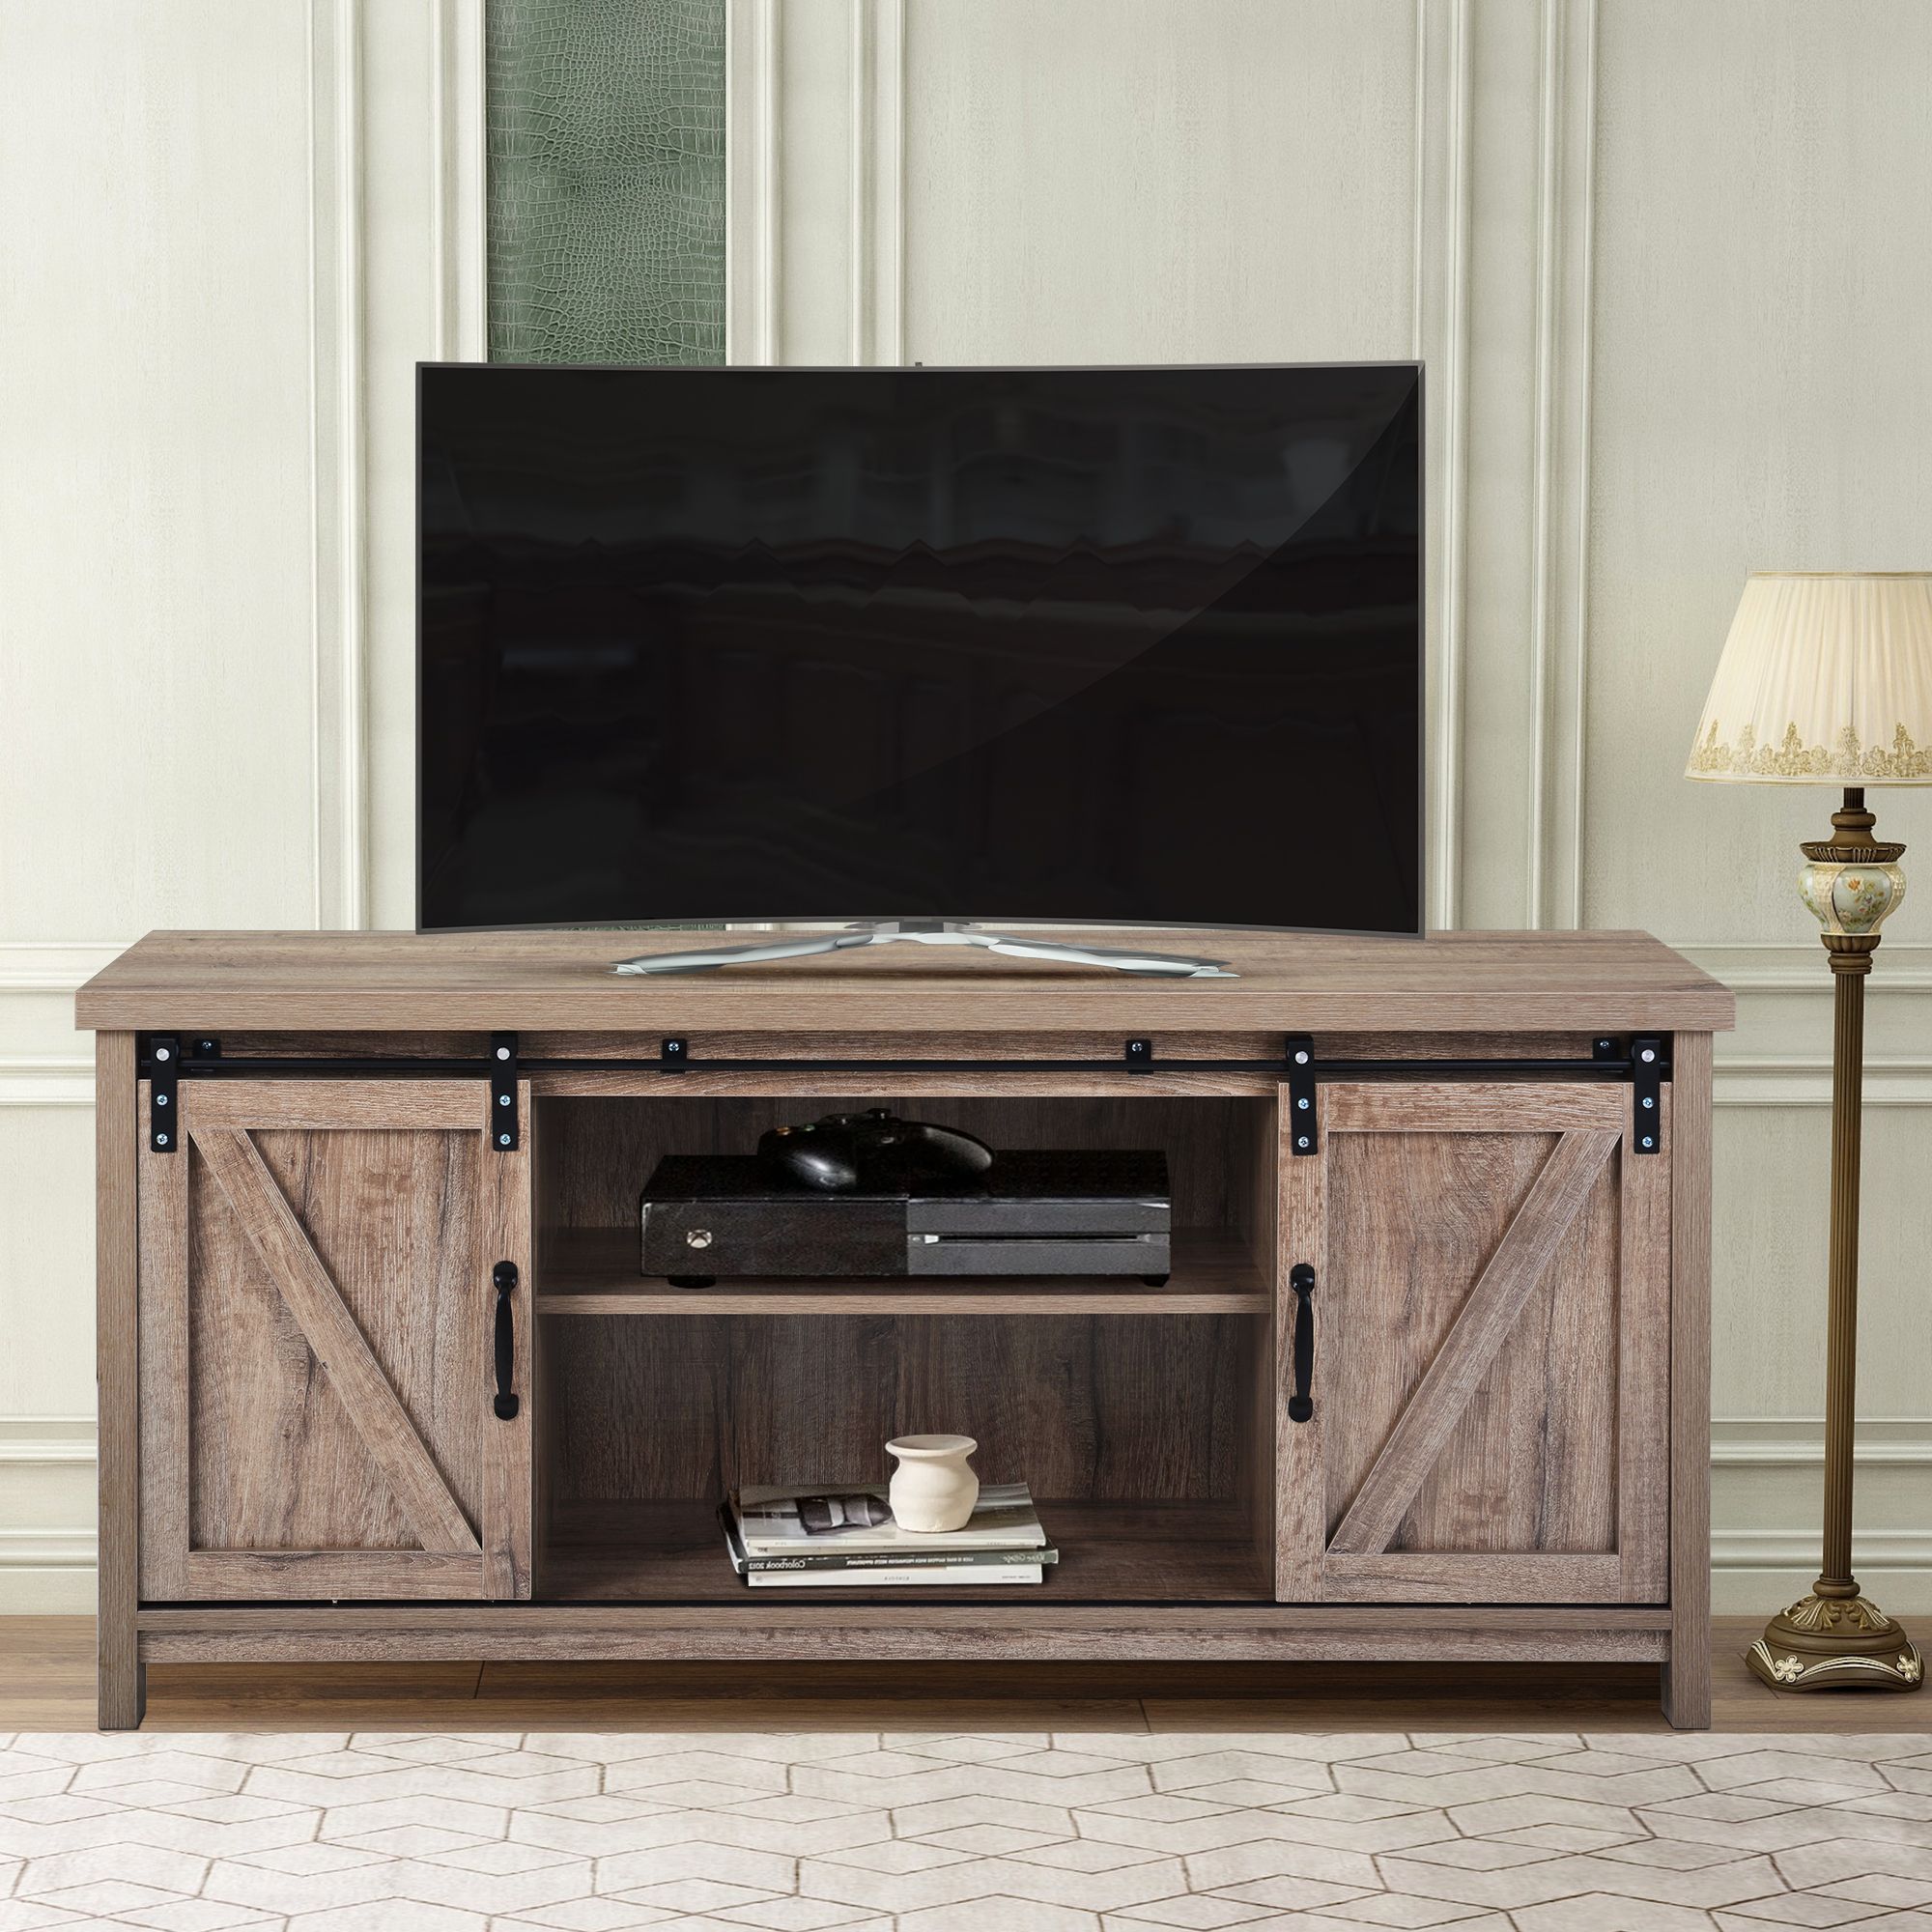 Wood Tv Stand, Modern Corner Tv Table Stands, Rustic Style Throughout Most Current Modern 2 Glass Door Corner Tv Stands (Photo 3 of 10)